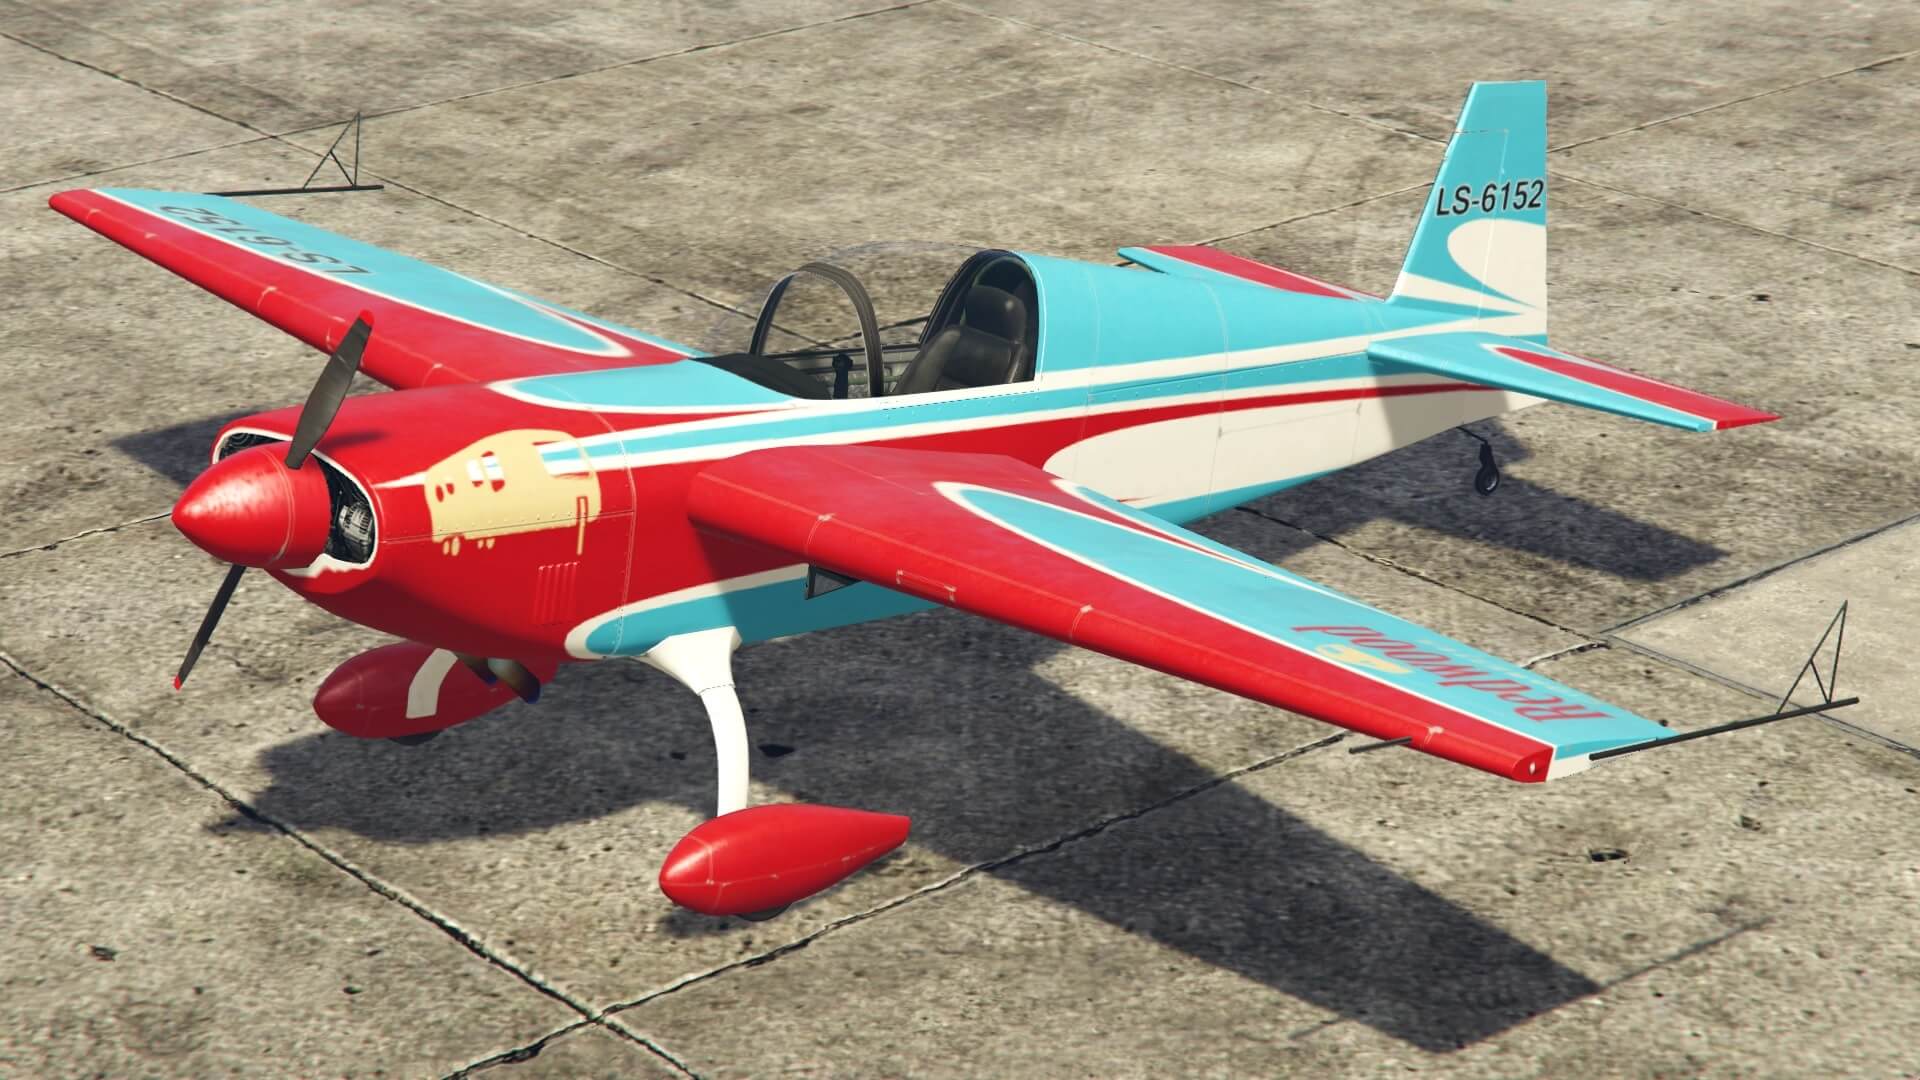 How do you spawn a plane in GTA?